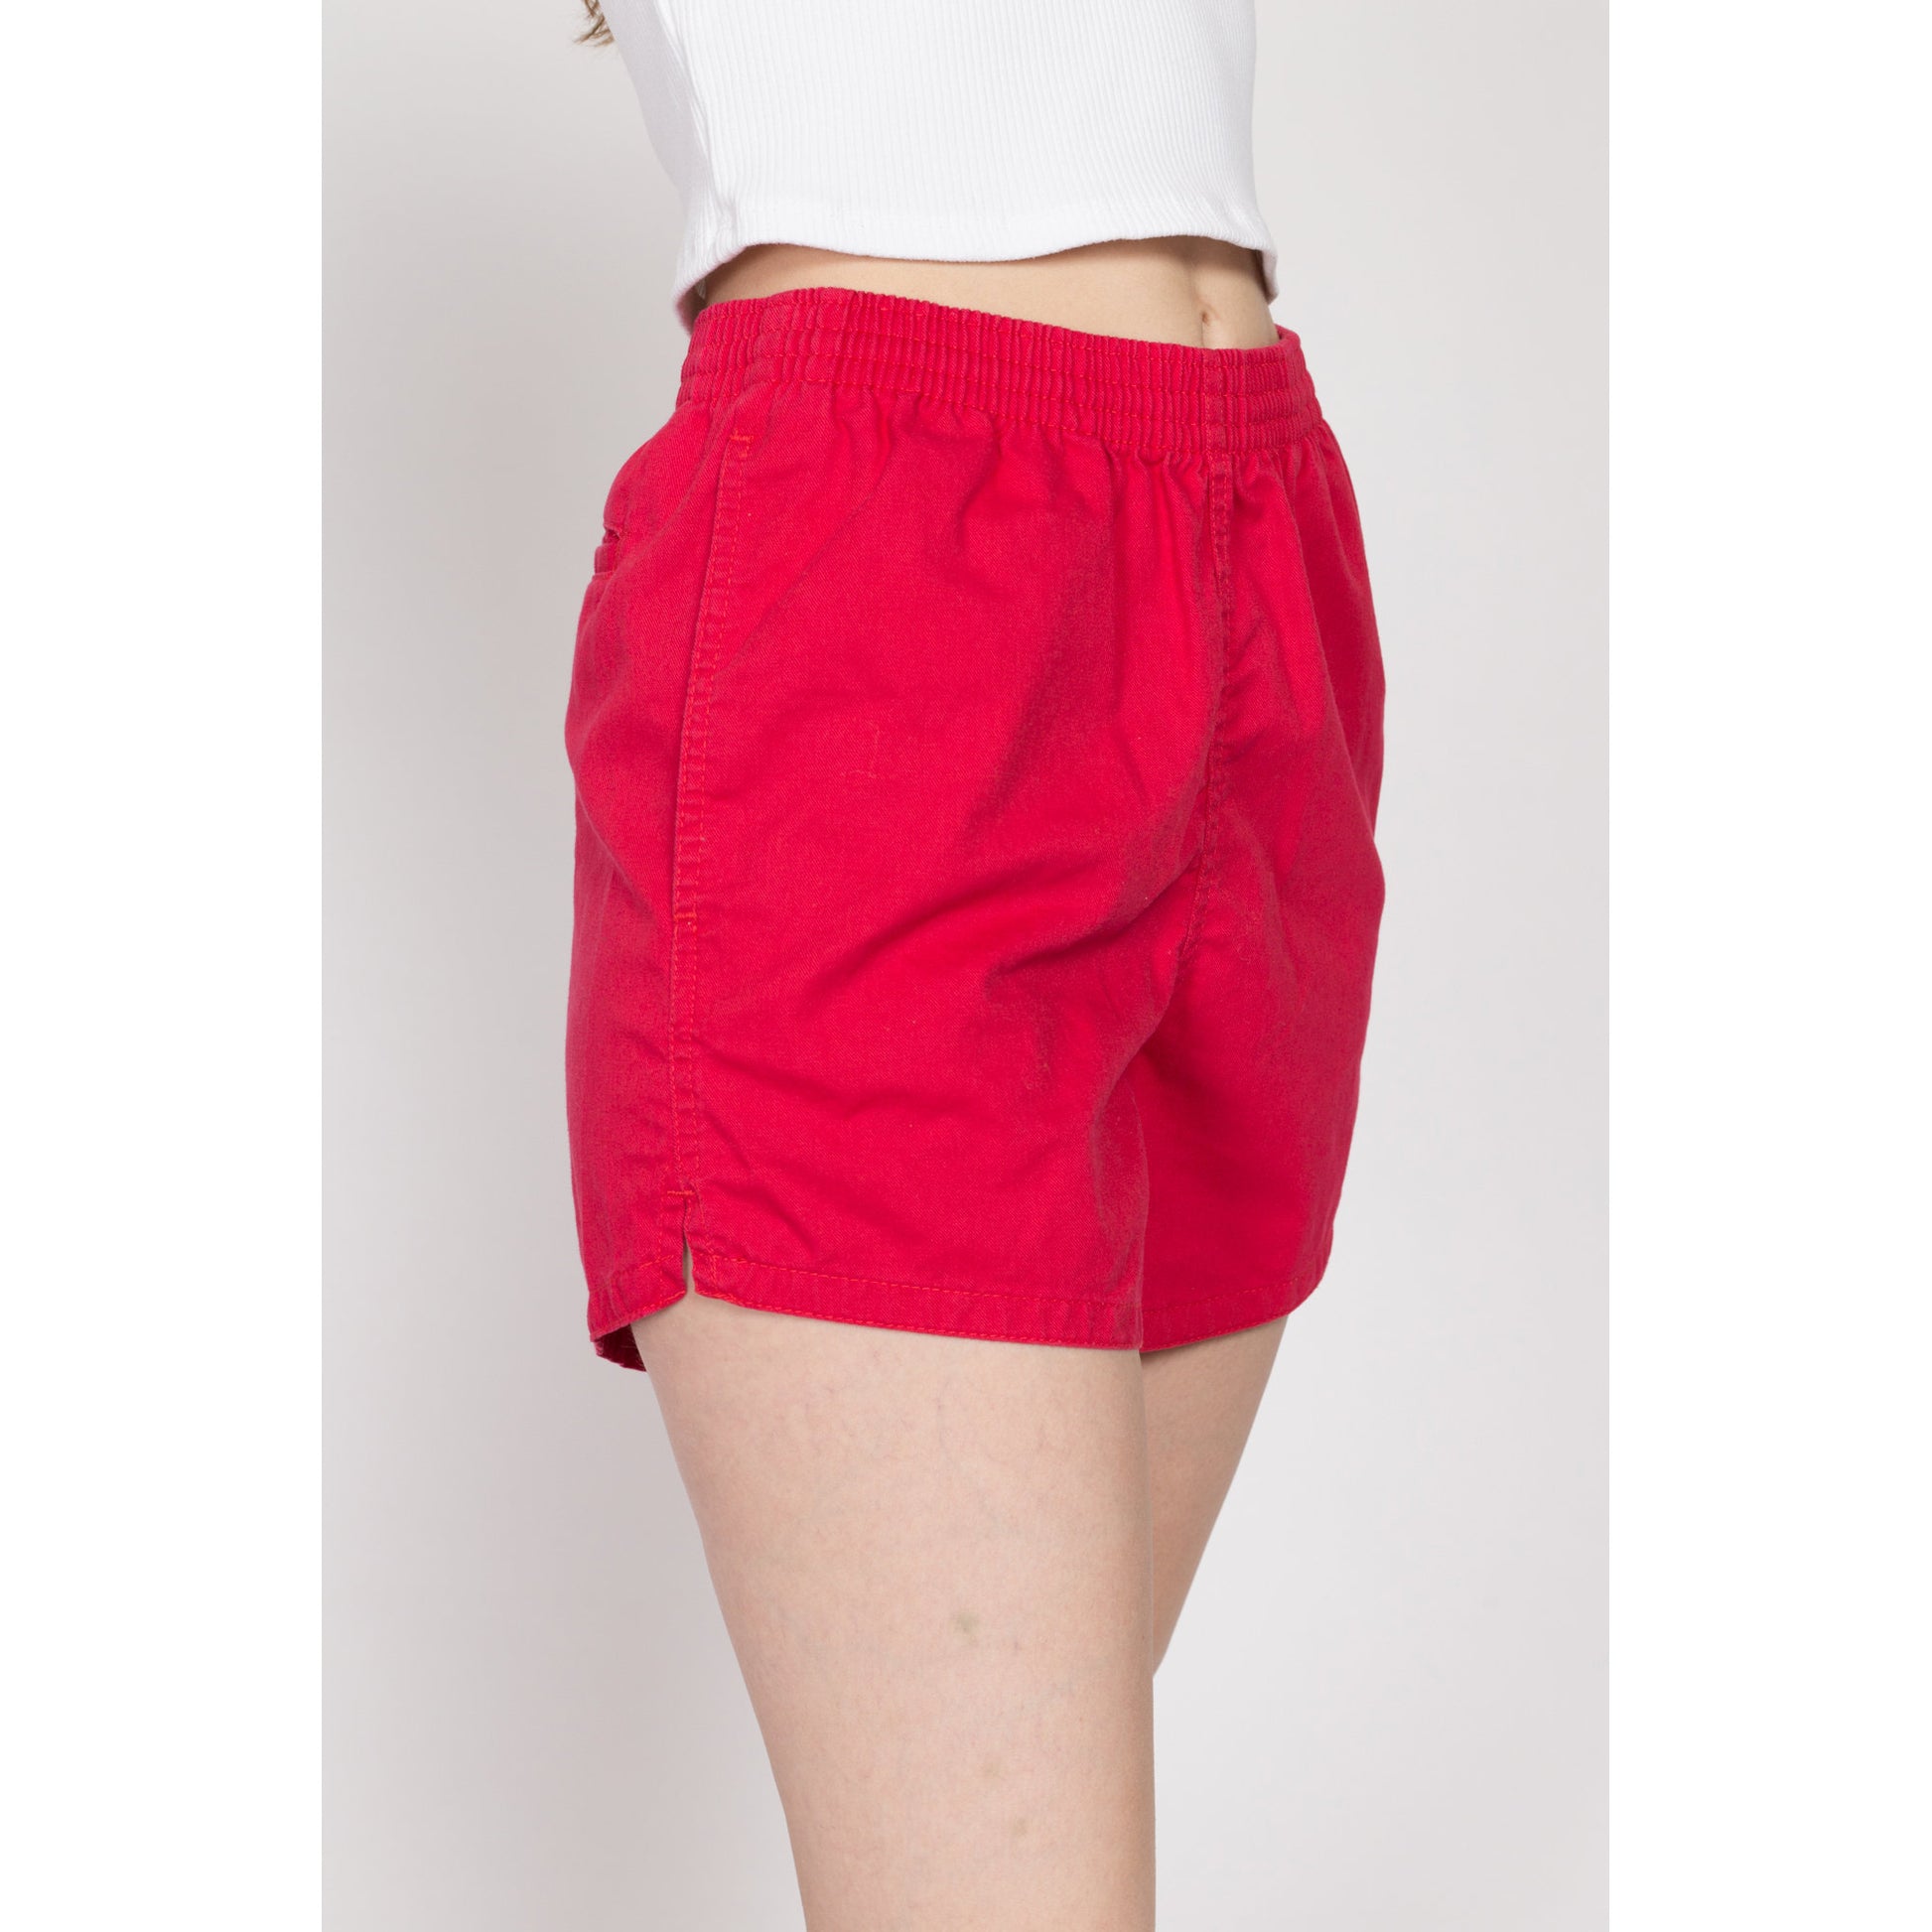 Small 90s Red Cotton Elastic Waist Shorts | Vintage High Rise Causal Pocket Athletic Shorts